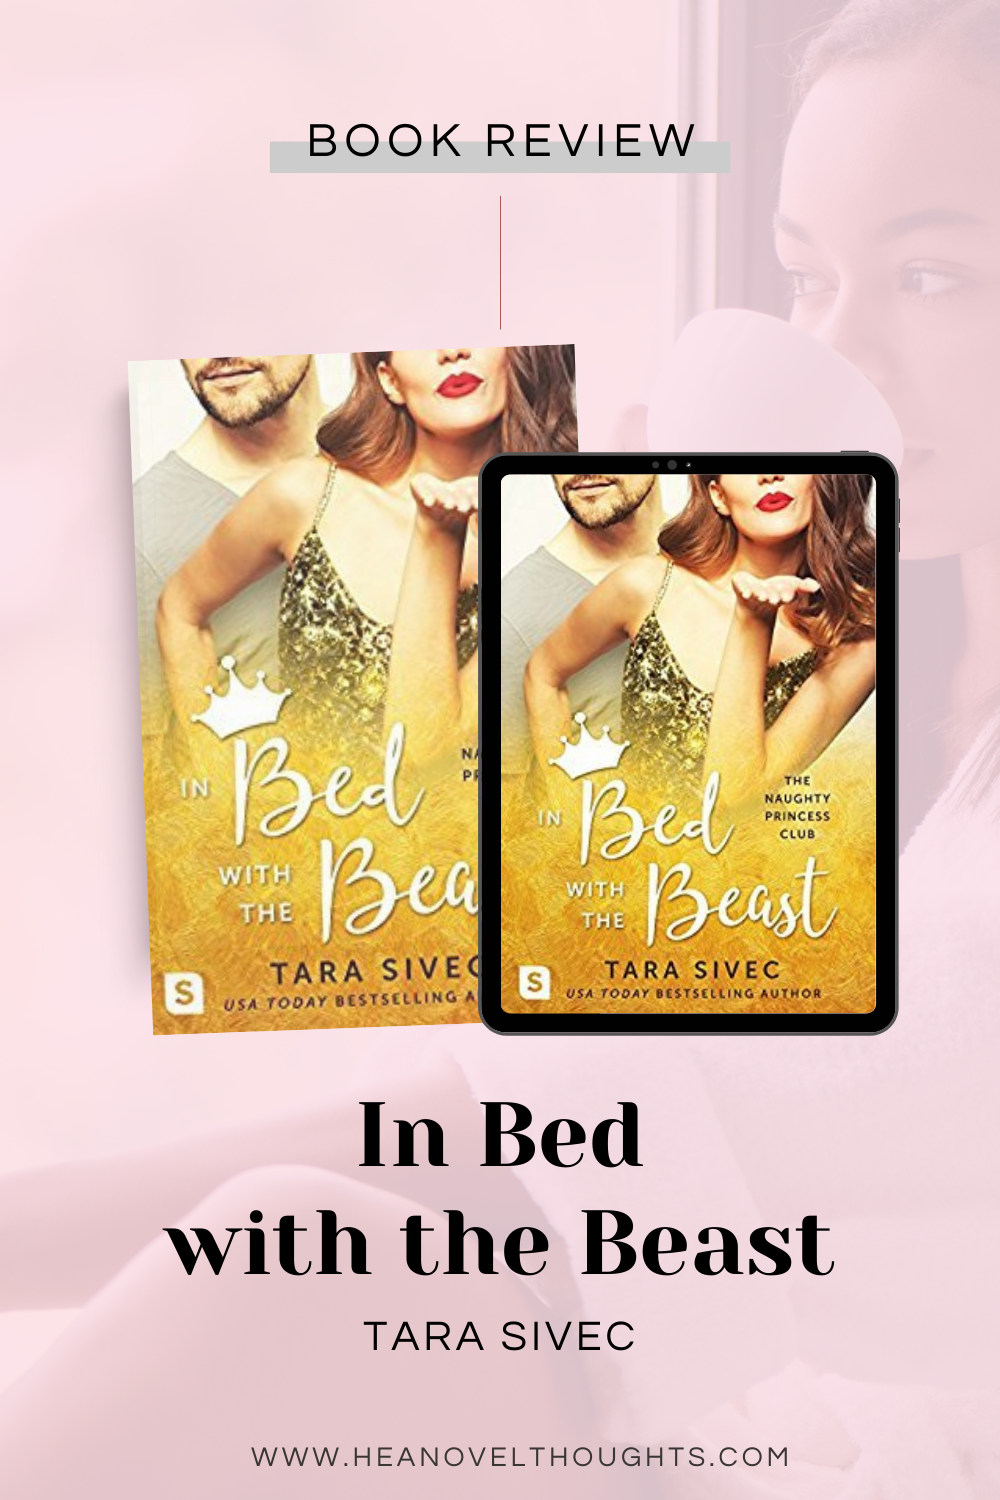 In Bed with the Beast by Tara Sivec